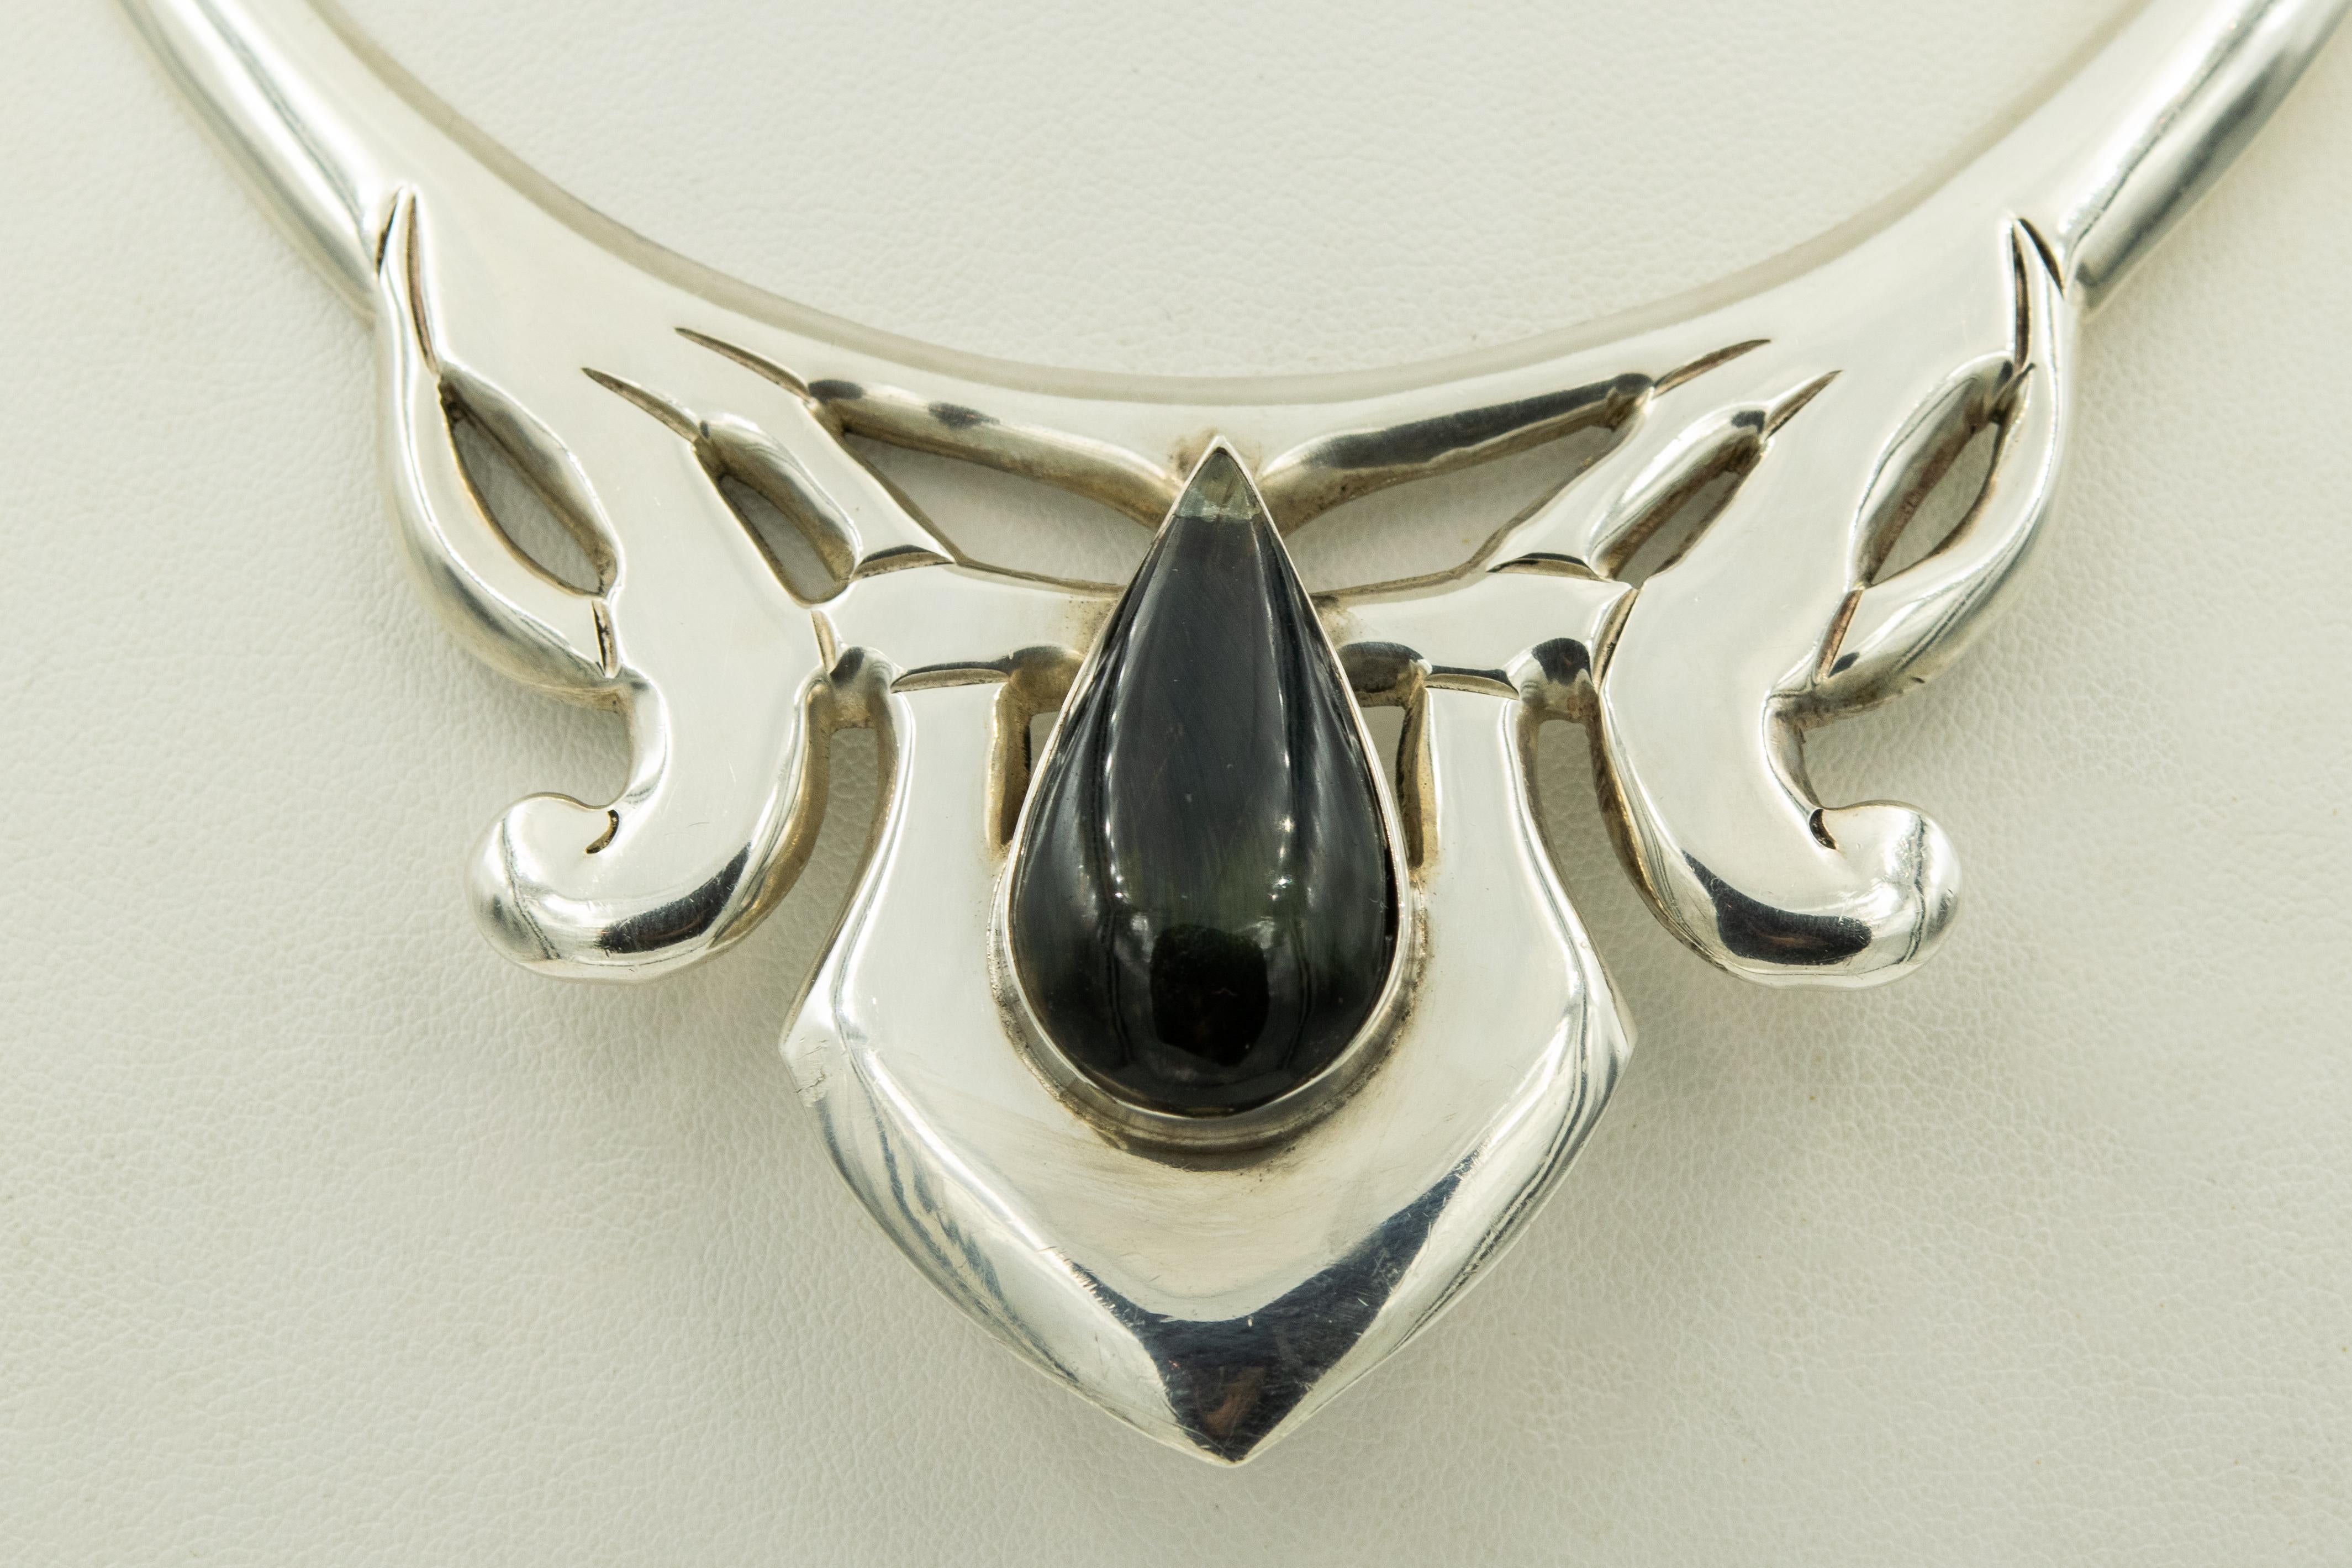 This stunning necklace has a modernist design in the center with a pear shaped rainbow obsidian in the center.  It is hinged on both sides and closes with a push in clasp at the back. The collar's inside measurement is approximately 14.5